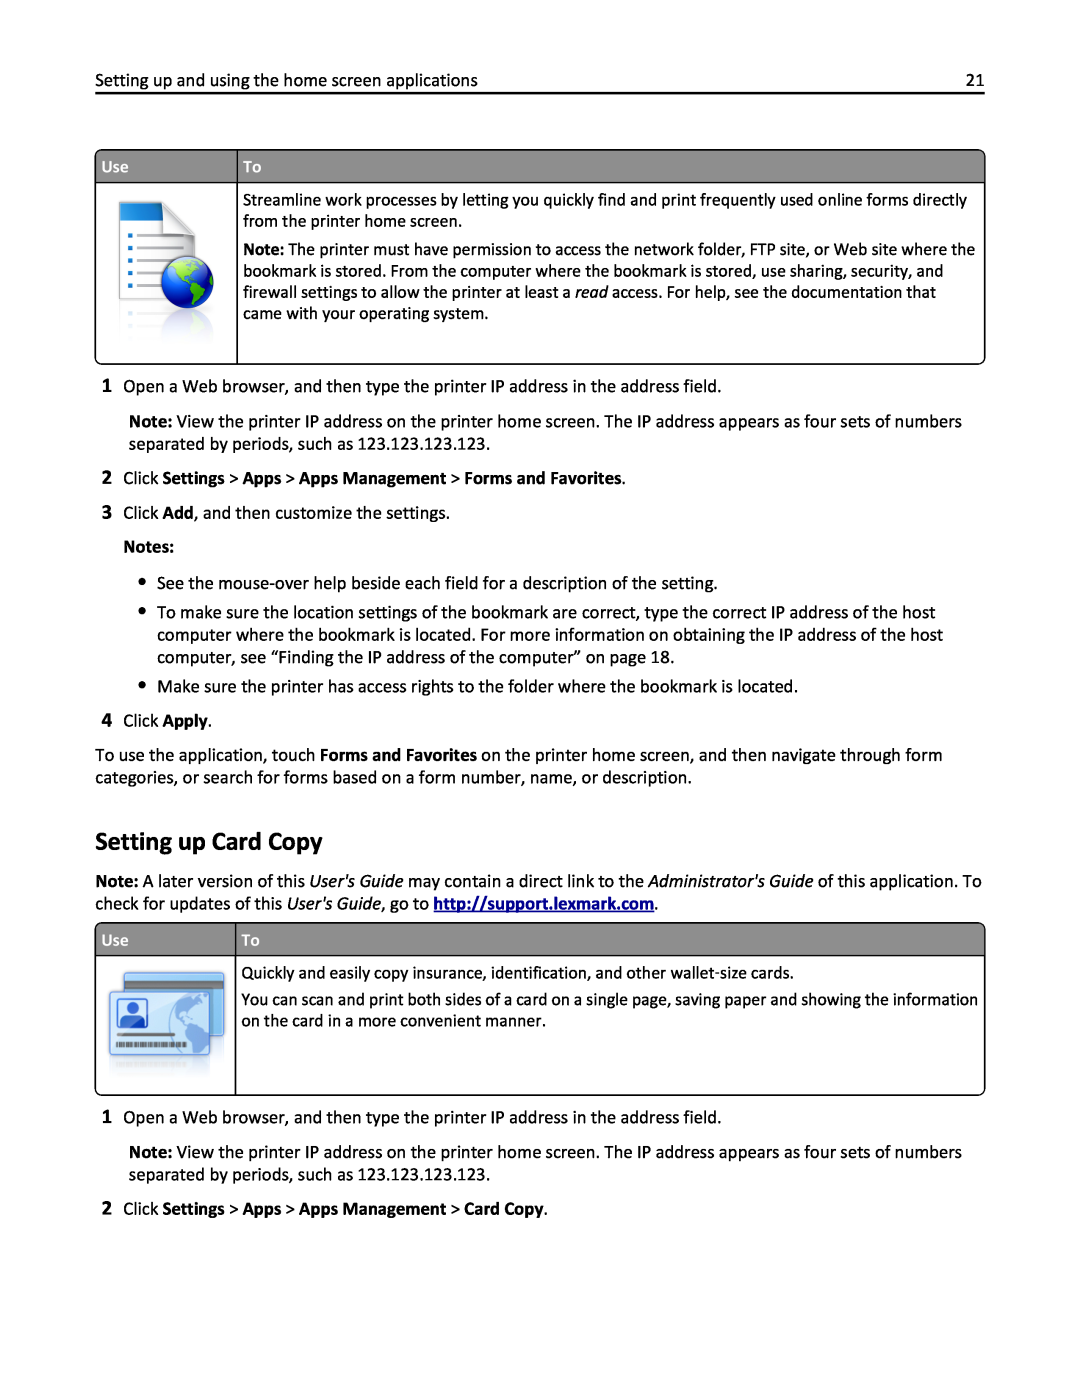 Lexmark 436 manual Setting up Card Copy, Click Settings Apps Apps Management Forms and Favorites 